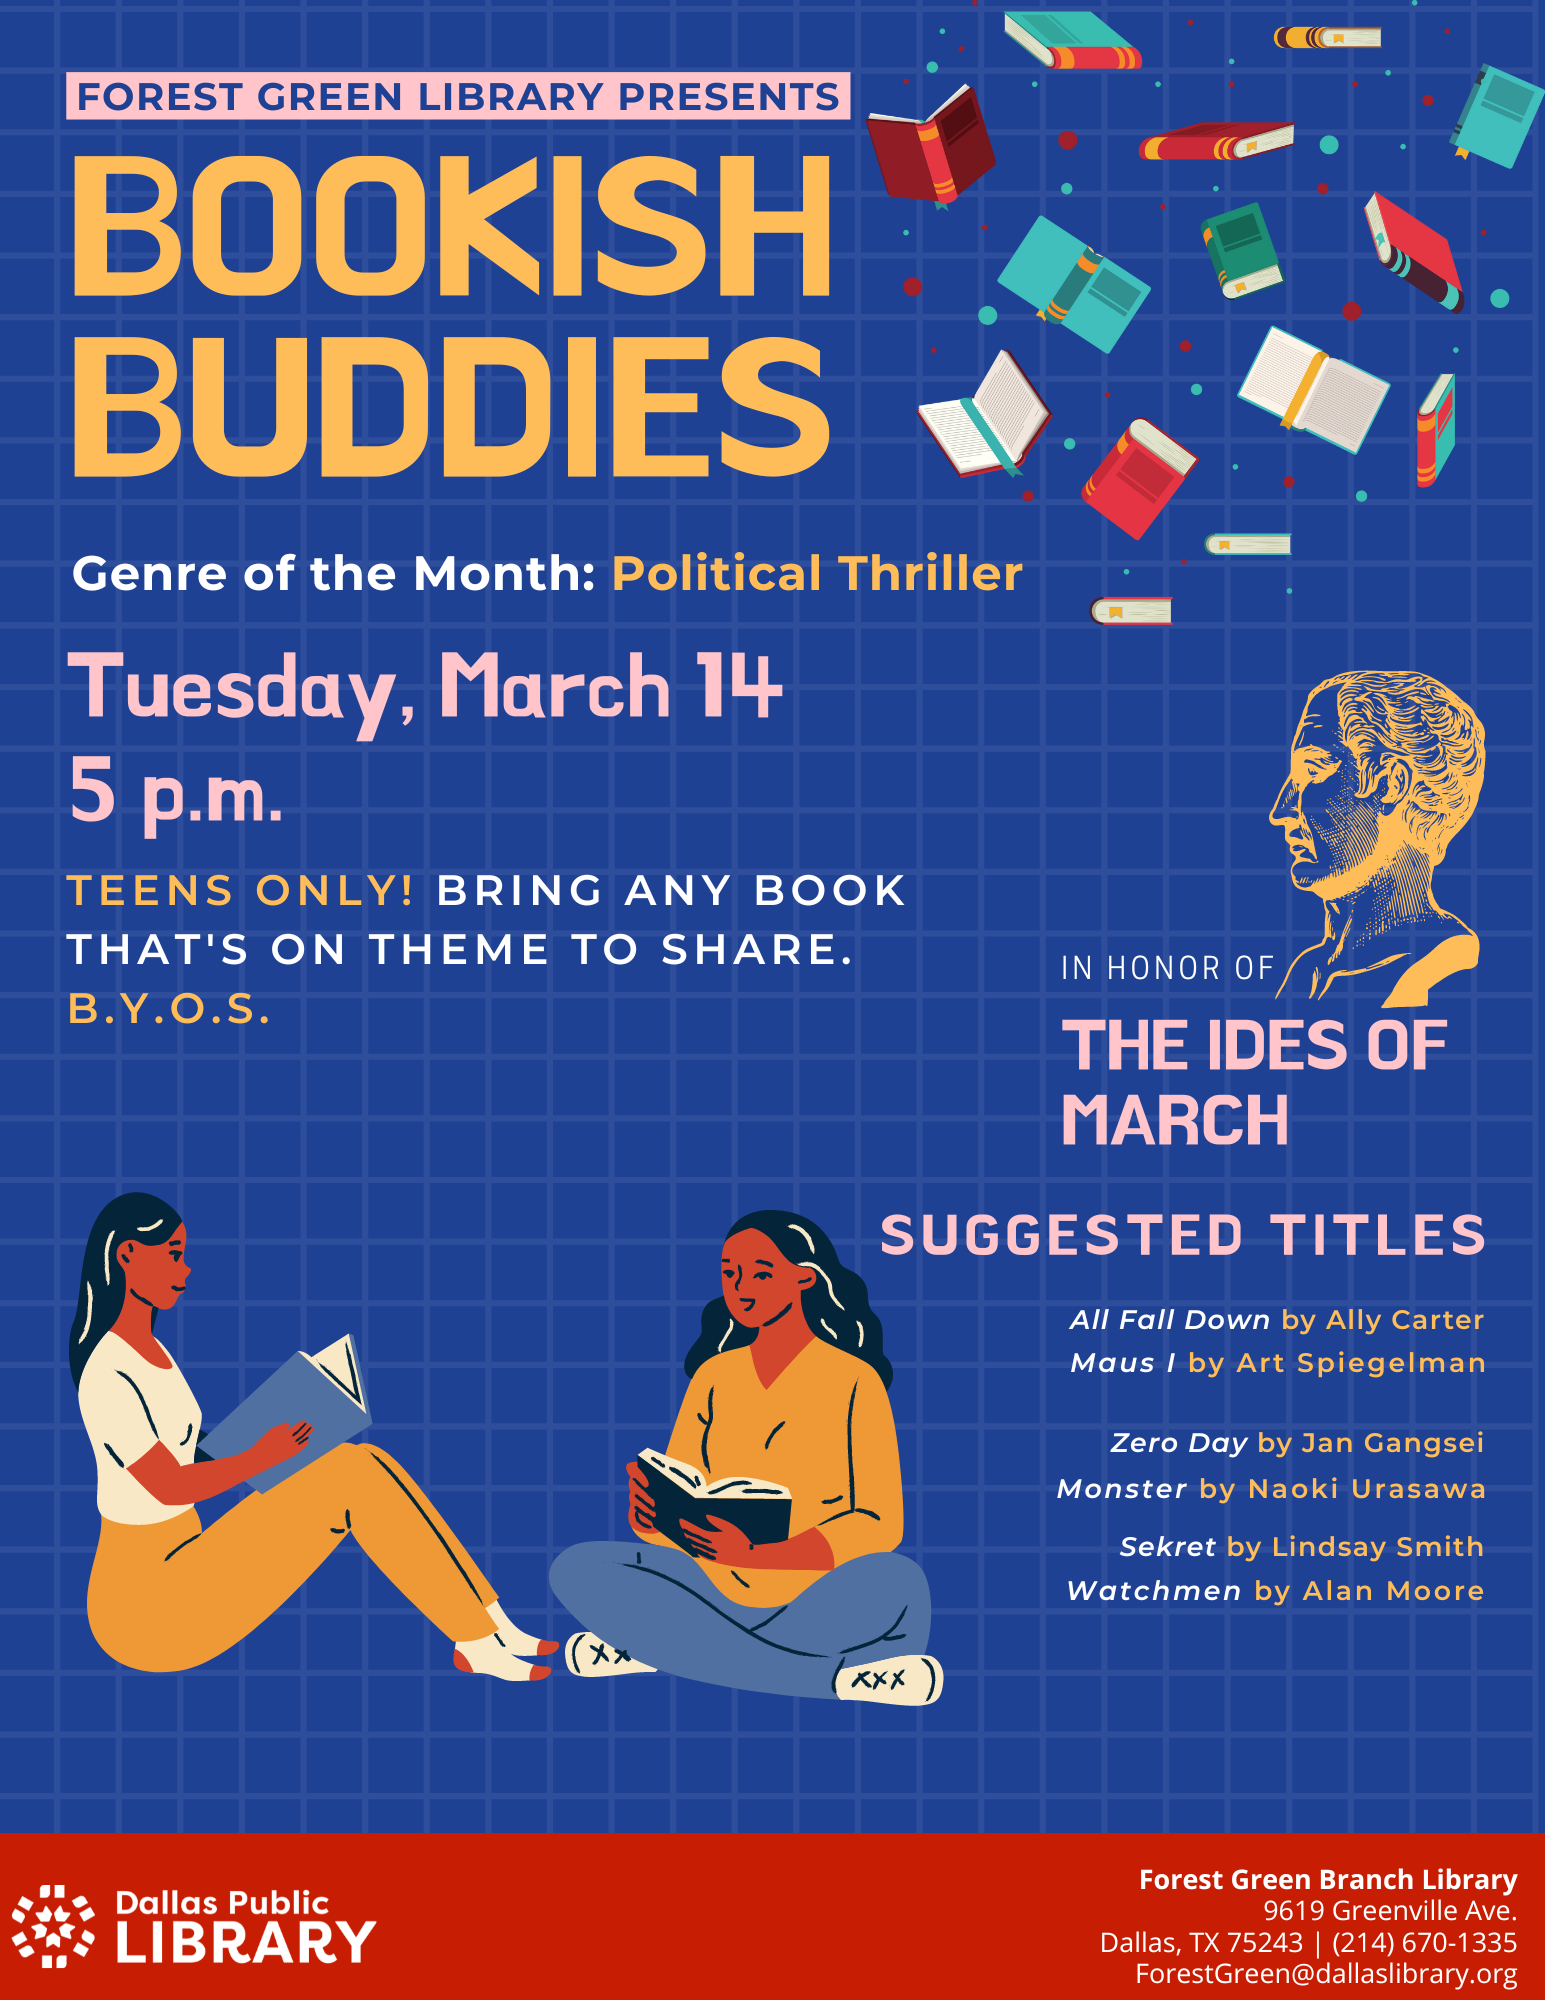 Forest Green Library Presents: Bookish Buddies. Genre of the Month: Political Thriller. Tuesday March 14, 5 p.m.  In honor of the Ides of March. Teens Only! Bring any book that's on theme to share. B.Y.O.S.  Suggested Titles: All Fall Down by Ally Carter, Maus I by Art Spiegelman, Zero Day by Jan Gangsei, Monster by Naoki Urasawa, Sekret by Lindsay Smith, Watchmen by Alan Moore